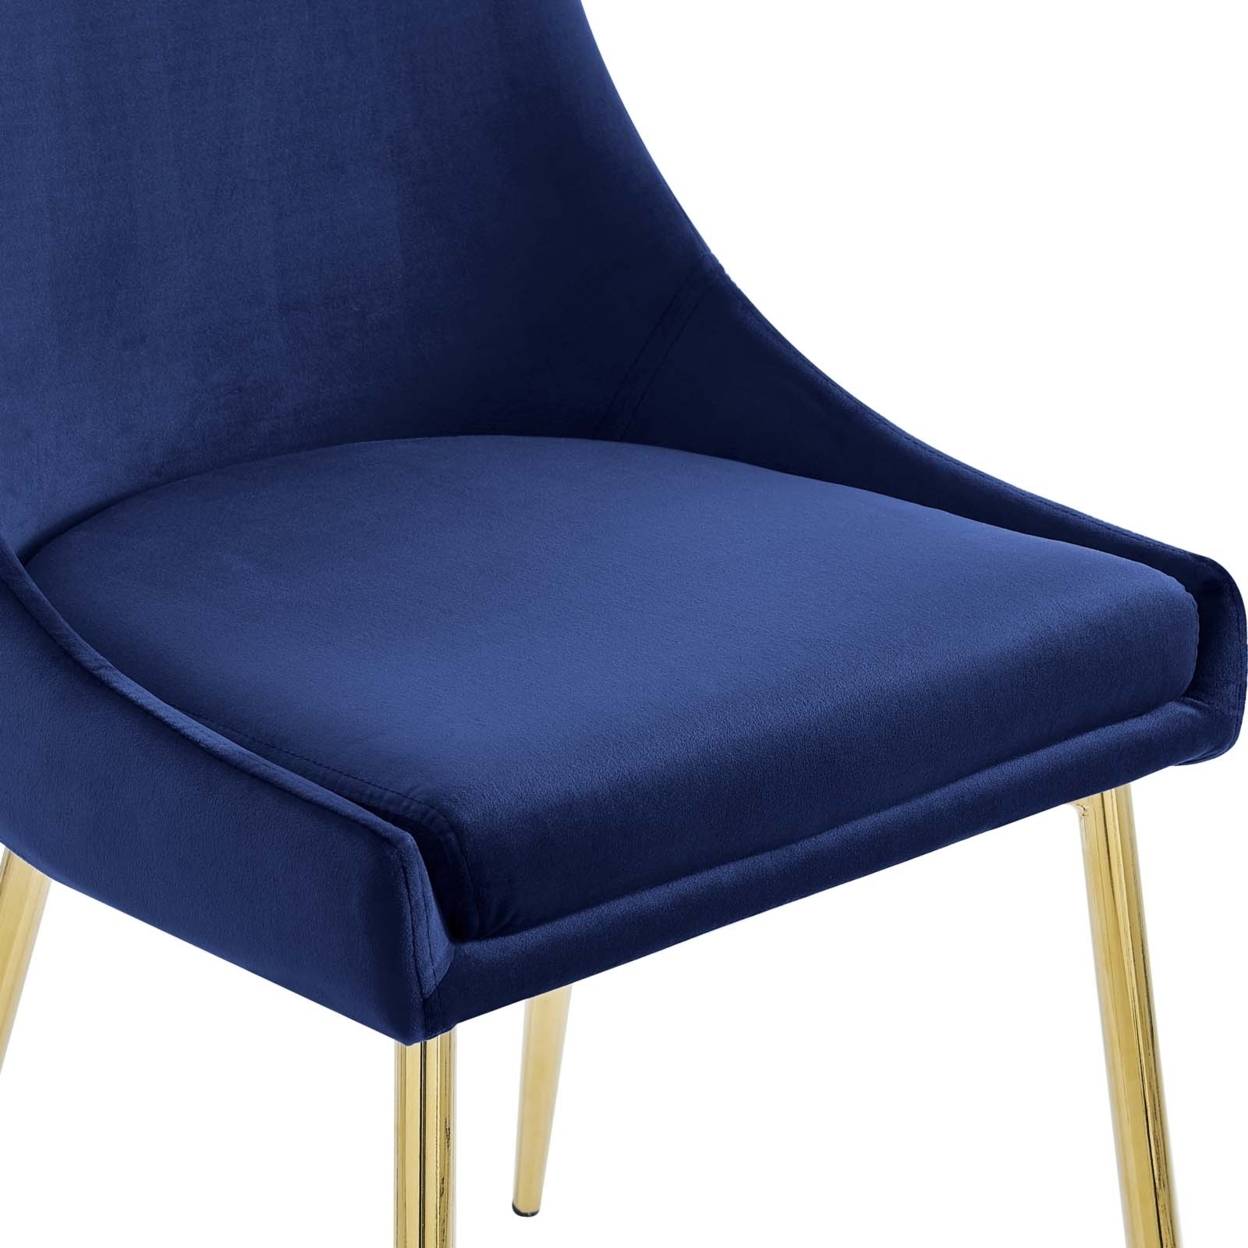 Viscount Performance Velvet Dining Chairs - Set Of 2, Gold Navy